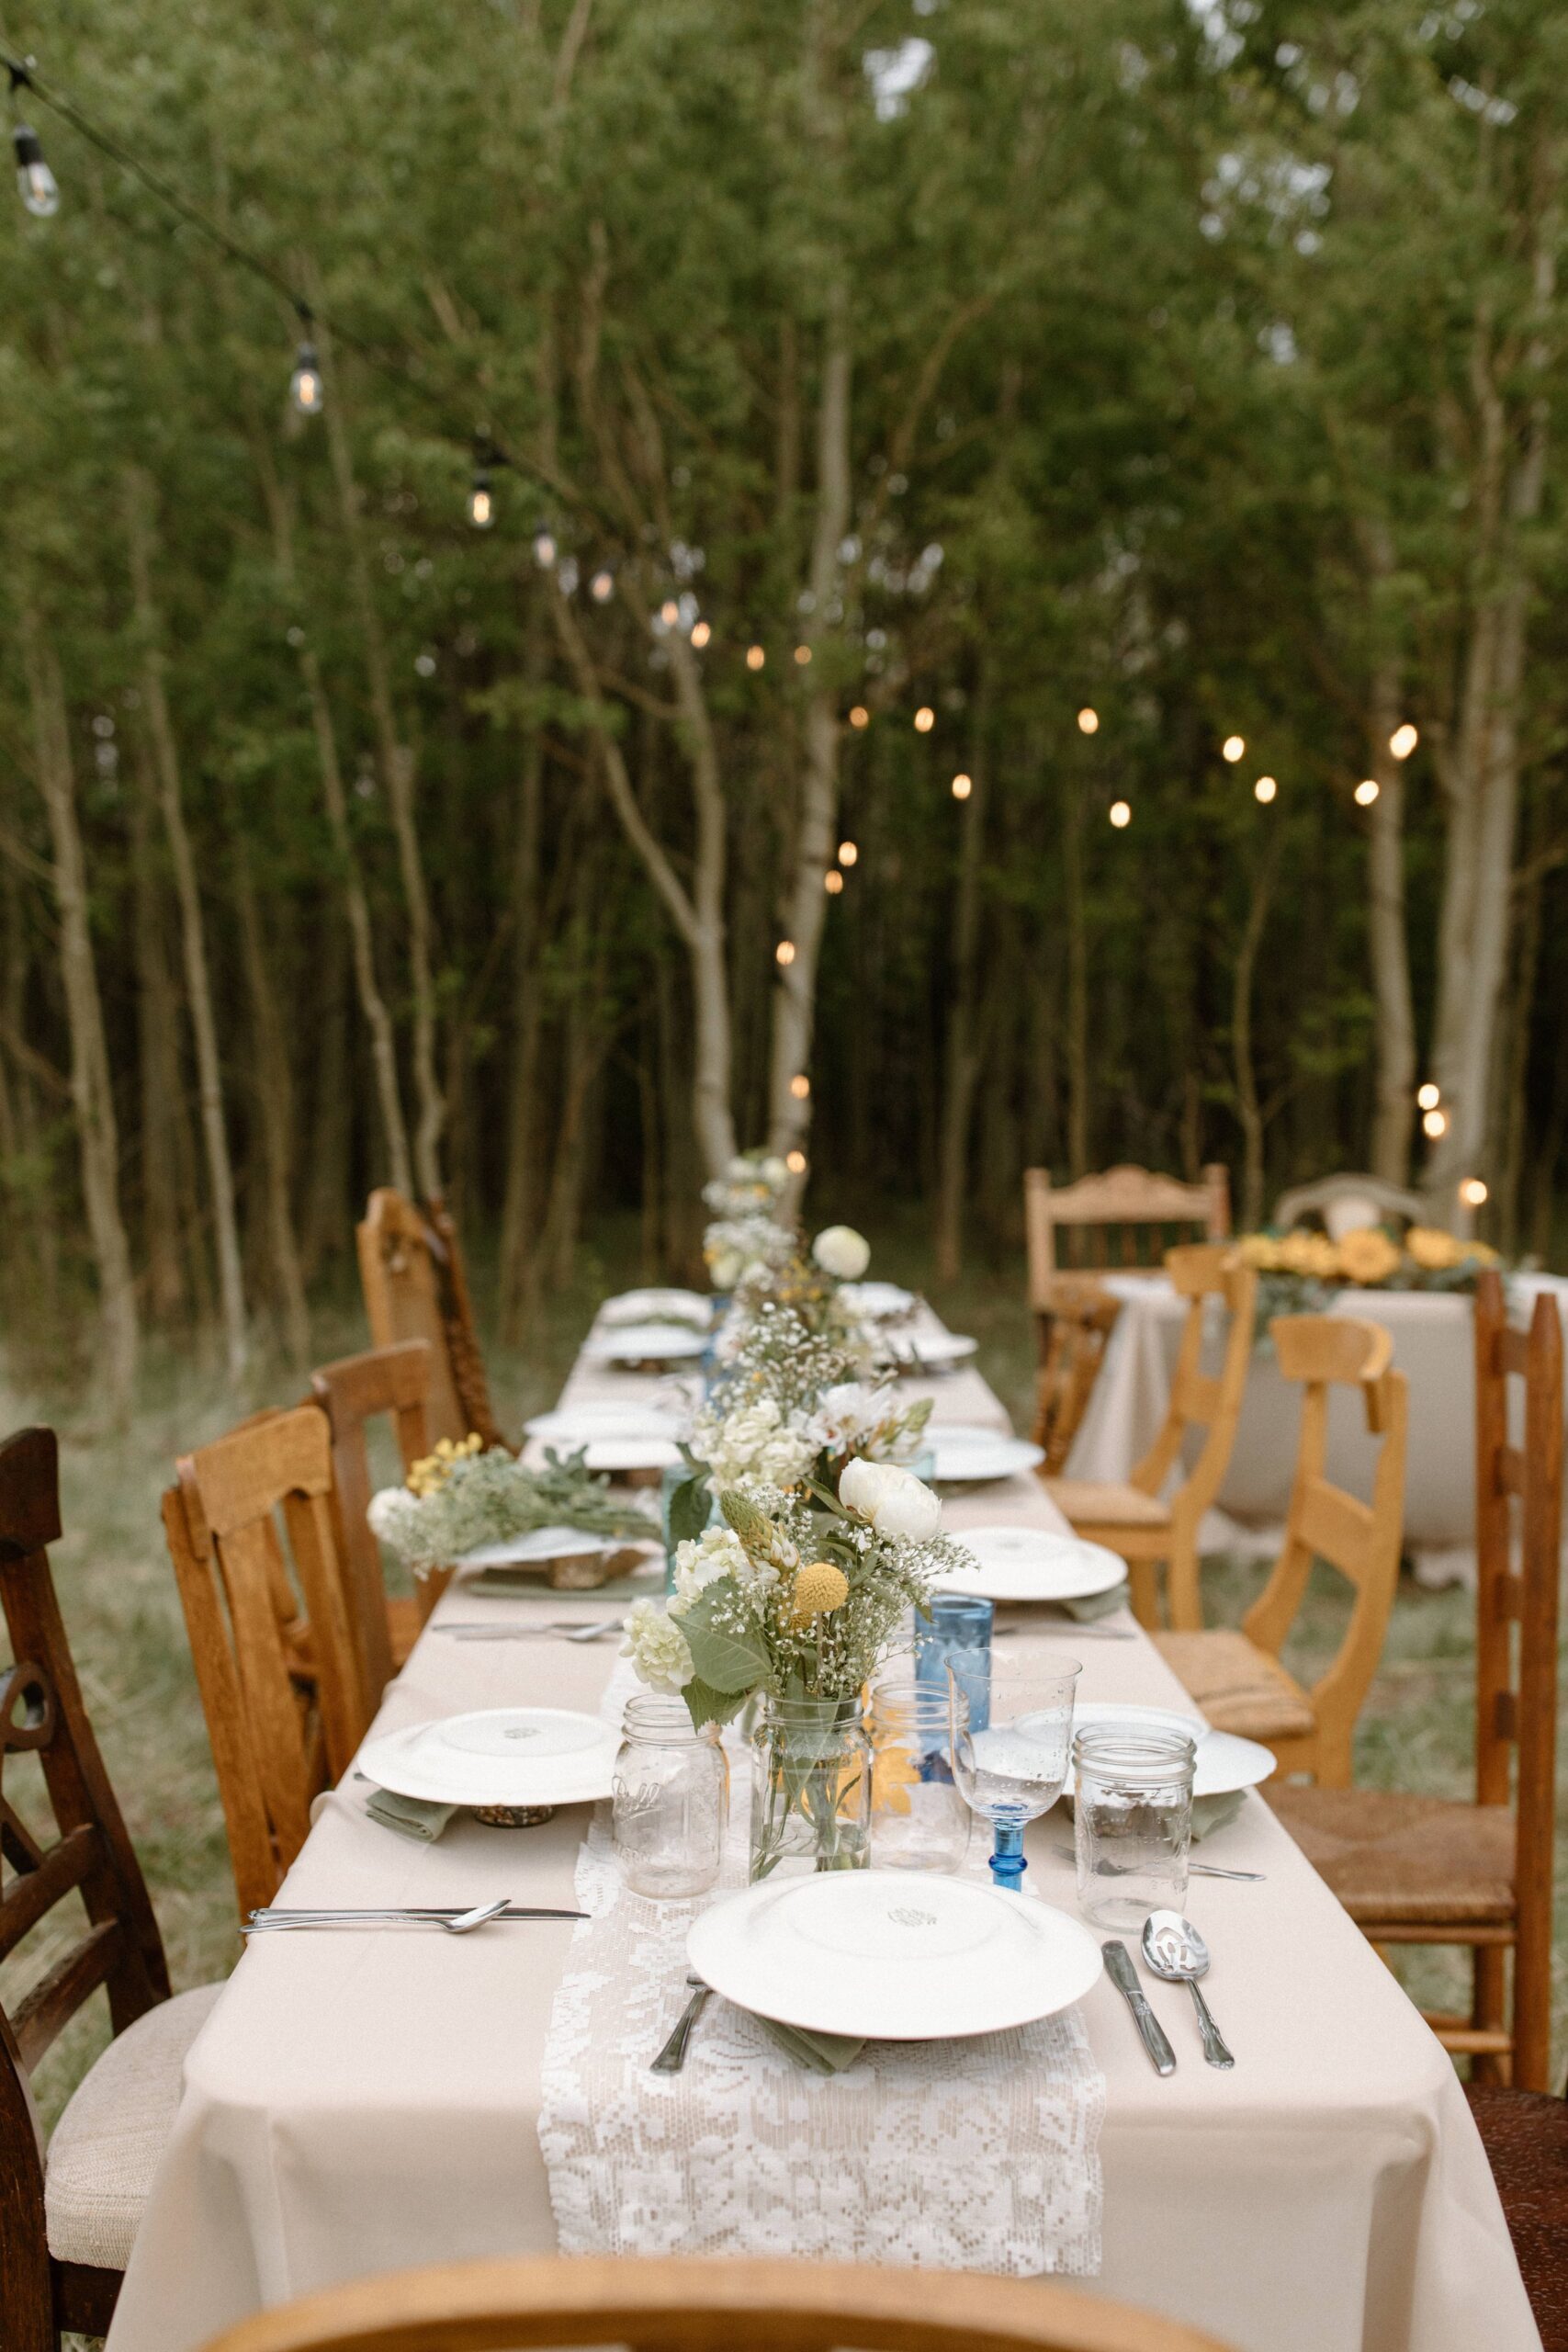 Completely thrifted wedding table settings for backyard wedding in Fairplay, Colorado